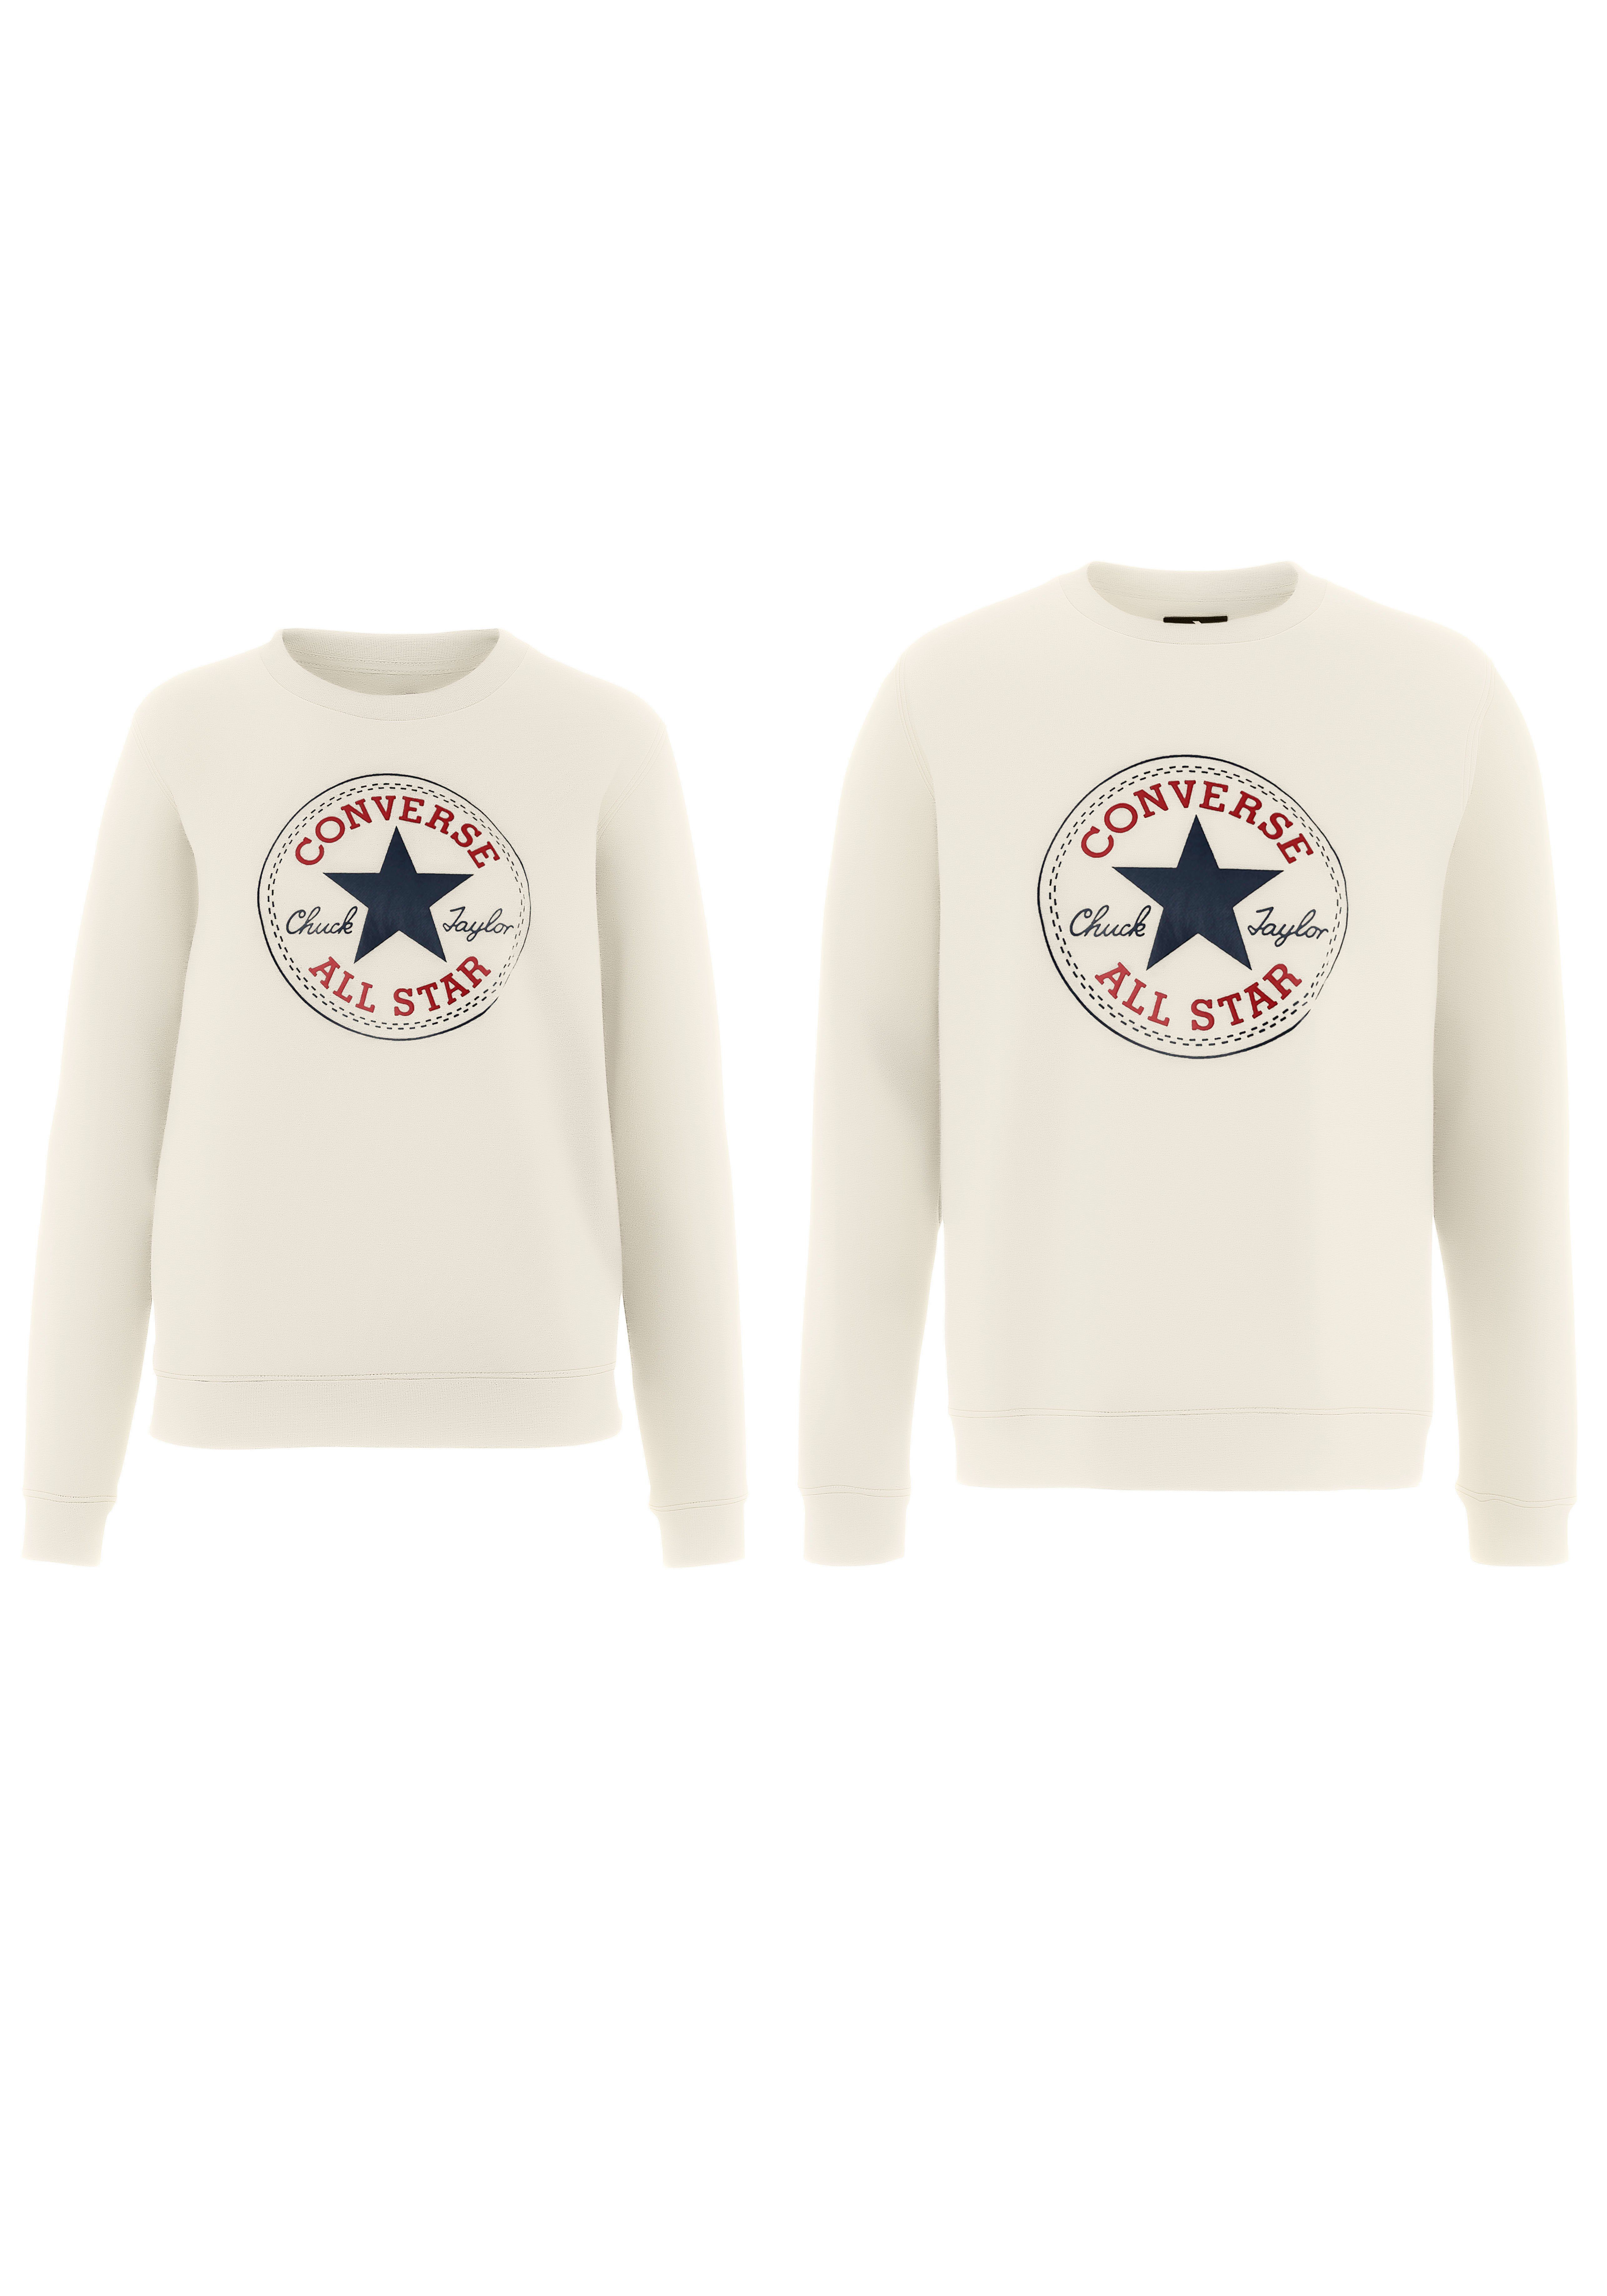 BACK EGR ALL STAR Converse UNISEX BRUSHED Sweatshirt PATCH